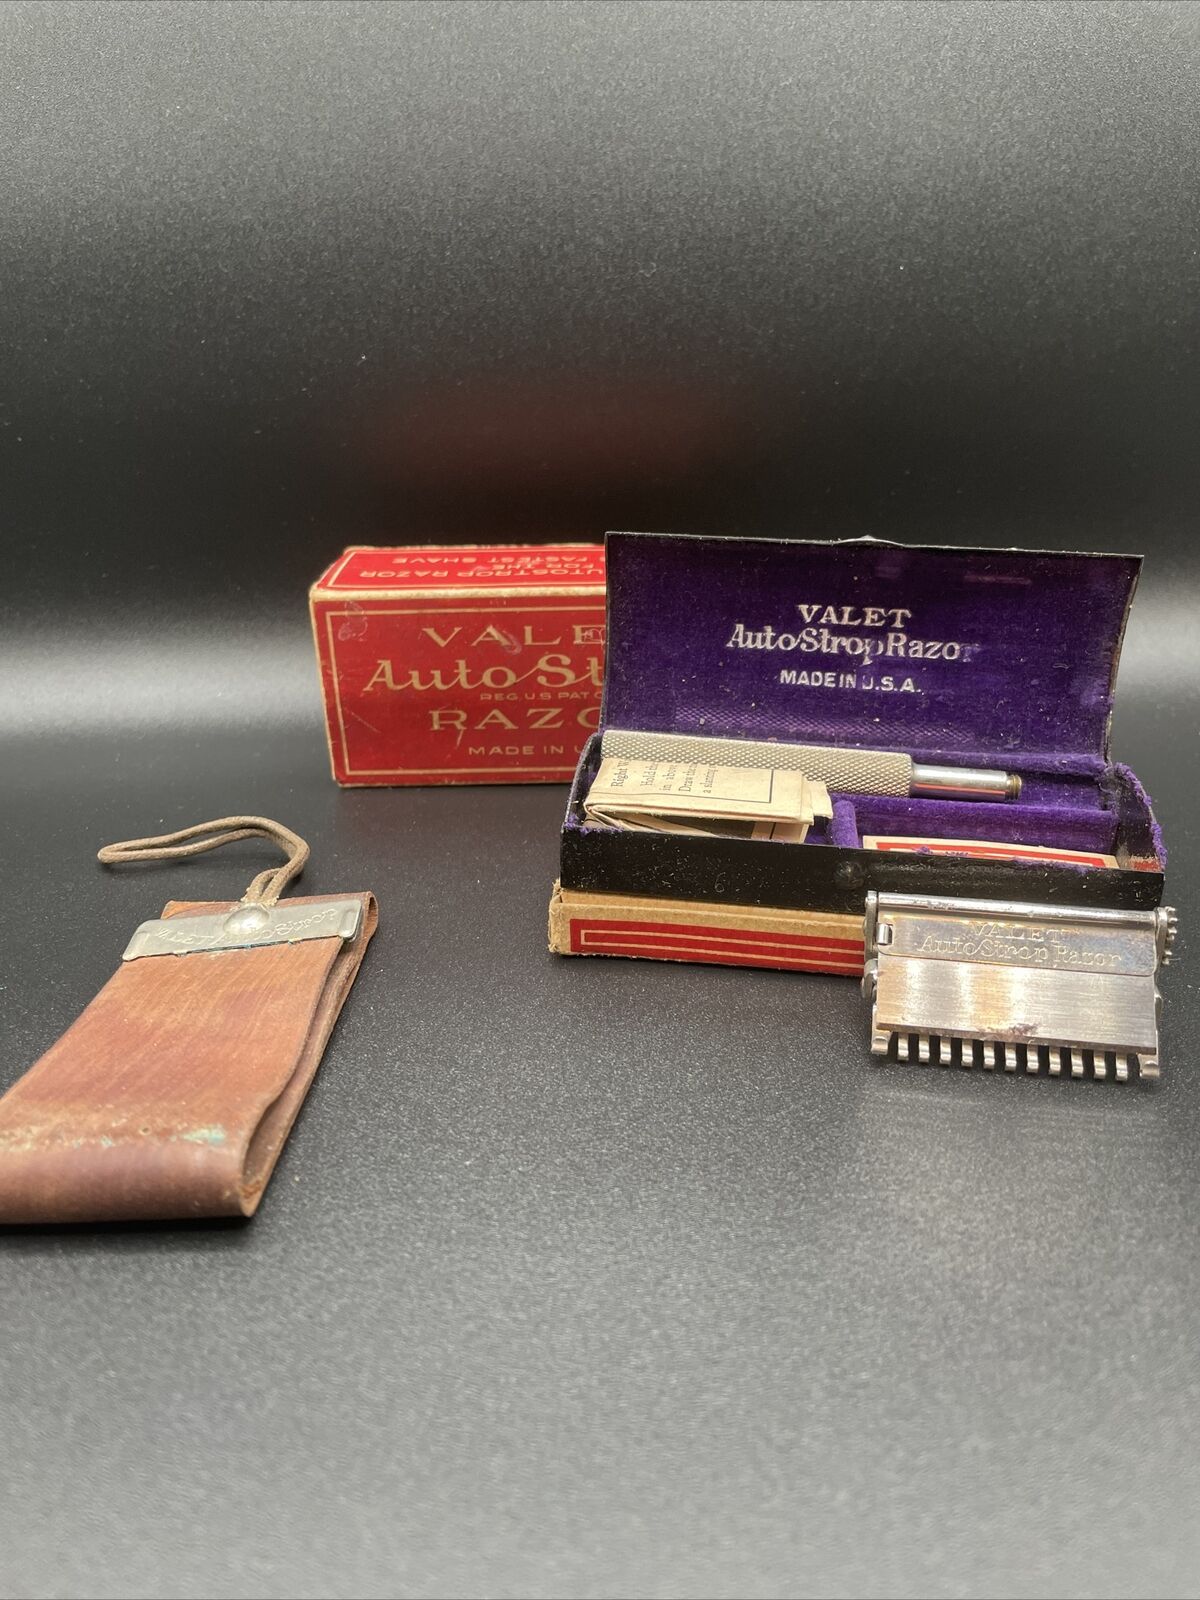 Vintage Valet Auto-Strop Razor with Original Box & Directions For Use: From 1912